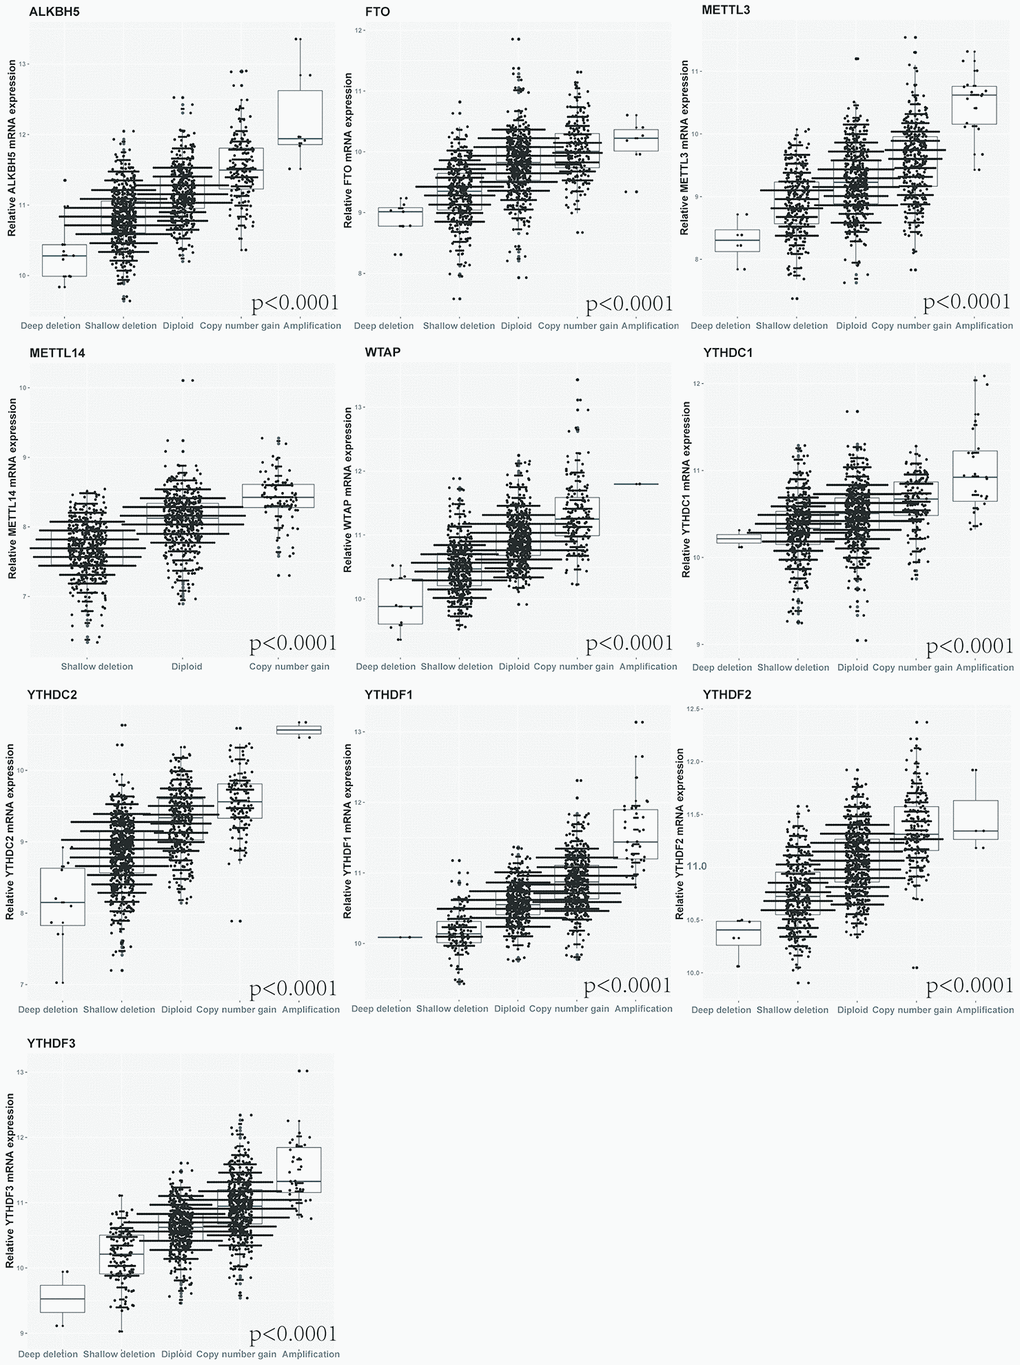 Correlation between different CNV patterns of 10 m6A regulatory genes and mRNA expression level.